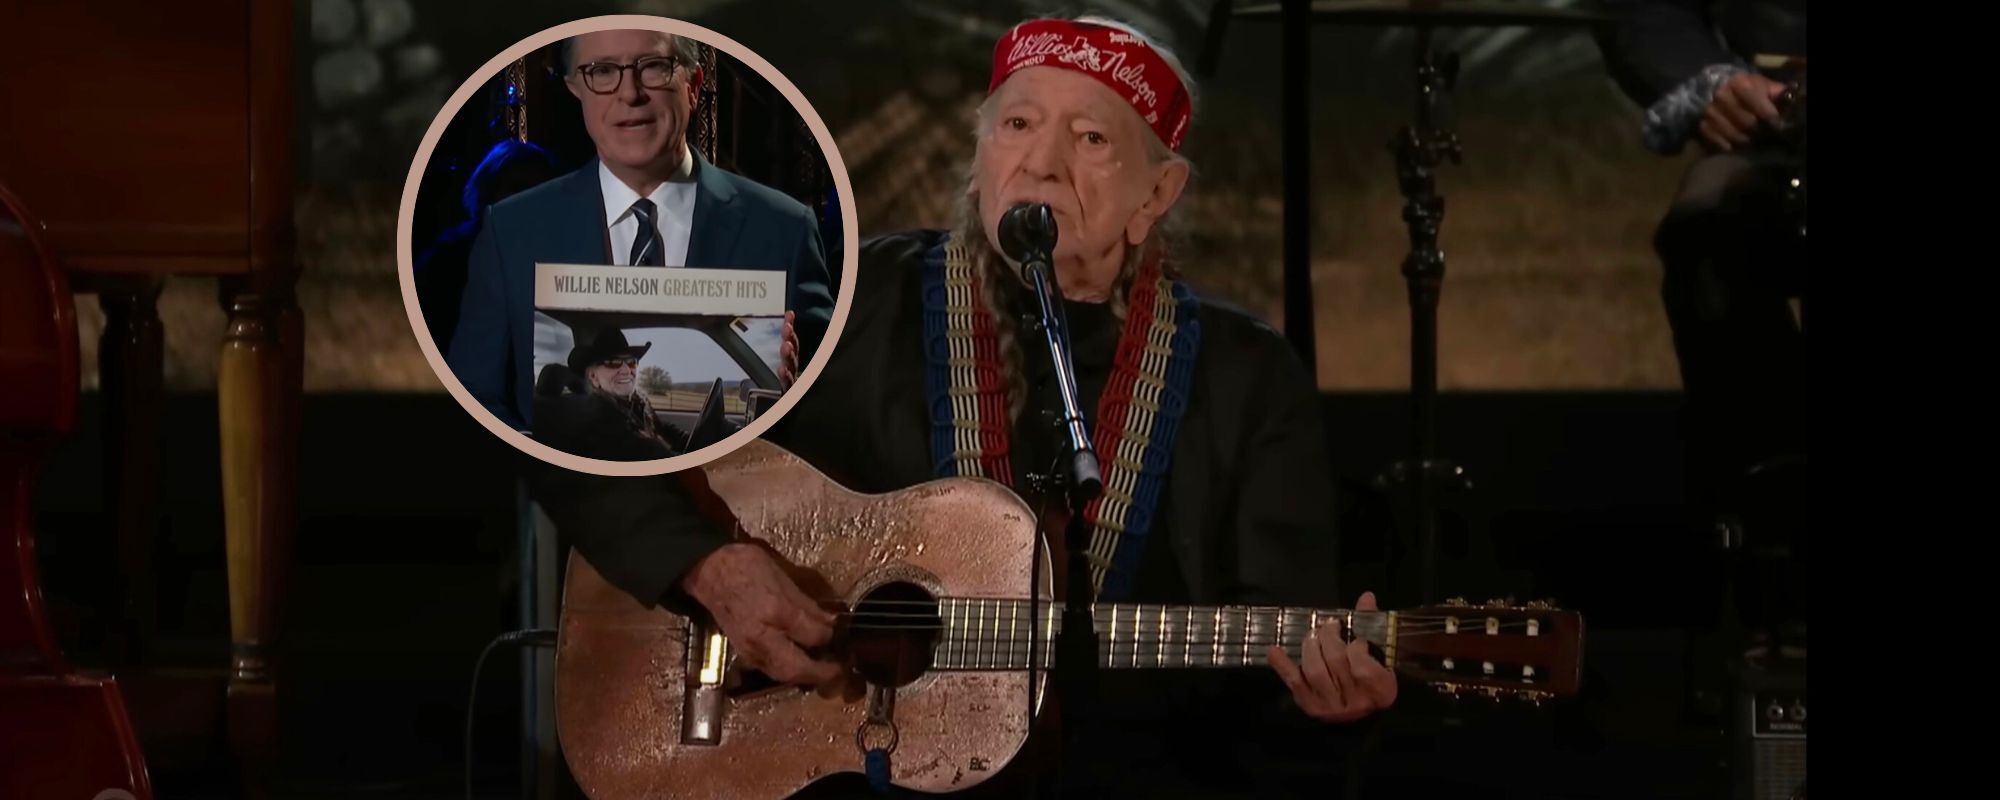 Watch: Willie Nelson Performs “I Never Cared for You”Ahead of Greatest Hits Album Release